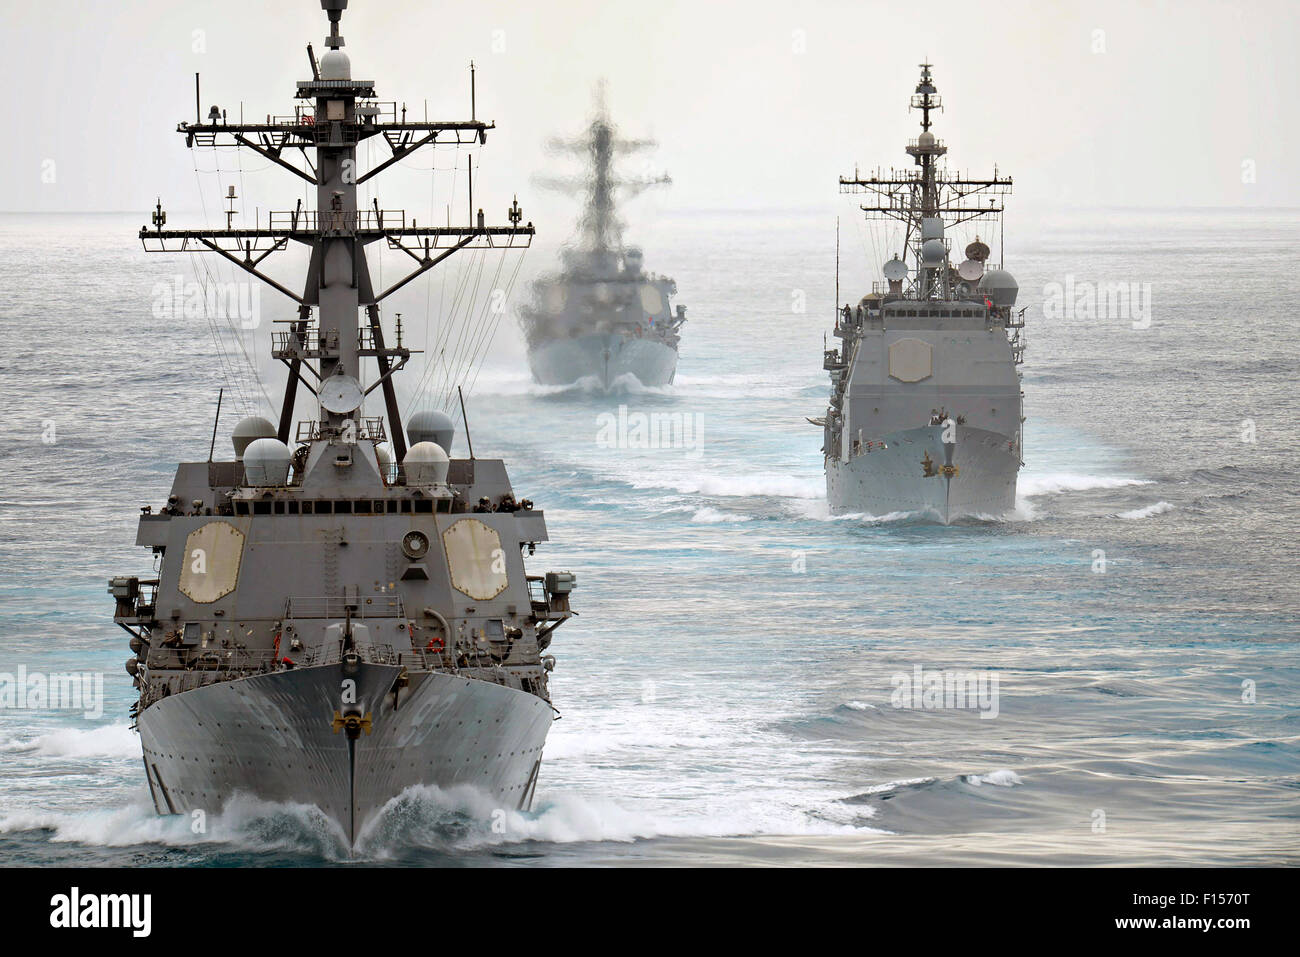 The U.S. Navy guided-missile destroyers USS Russel, USS Chung Hoon and the guided-missile cruiser USS Mobile Bay sail in formation during operations off the coast of San Clemente Island August 11, 2015 in the Pacific Ocean. Stock Photo